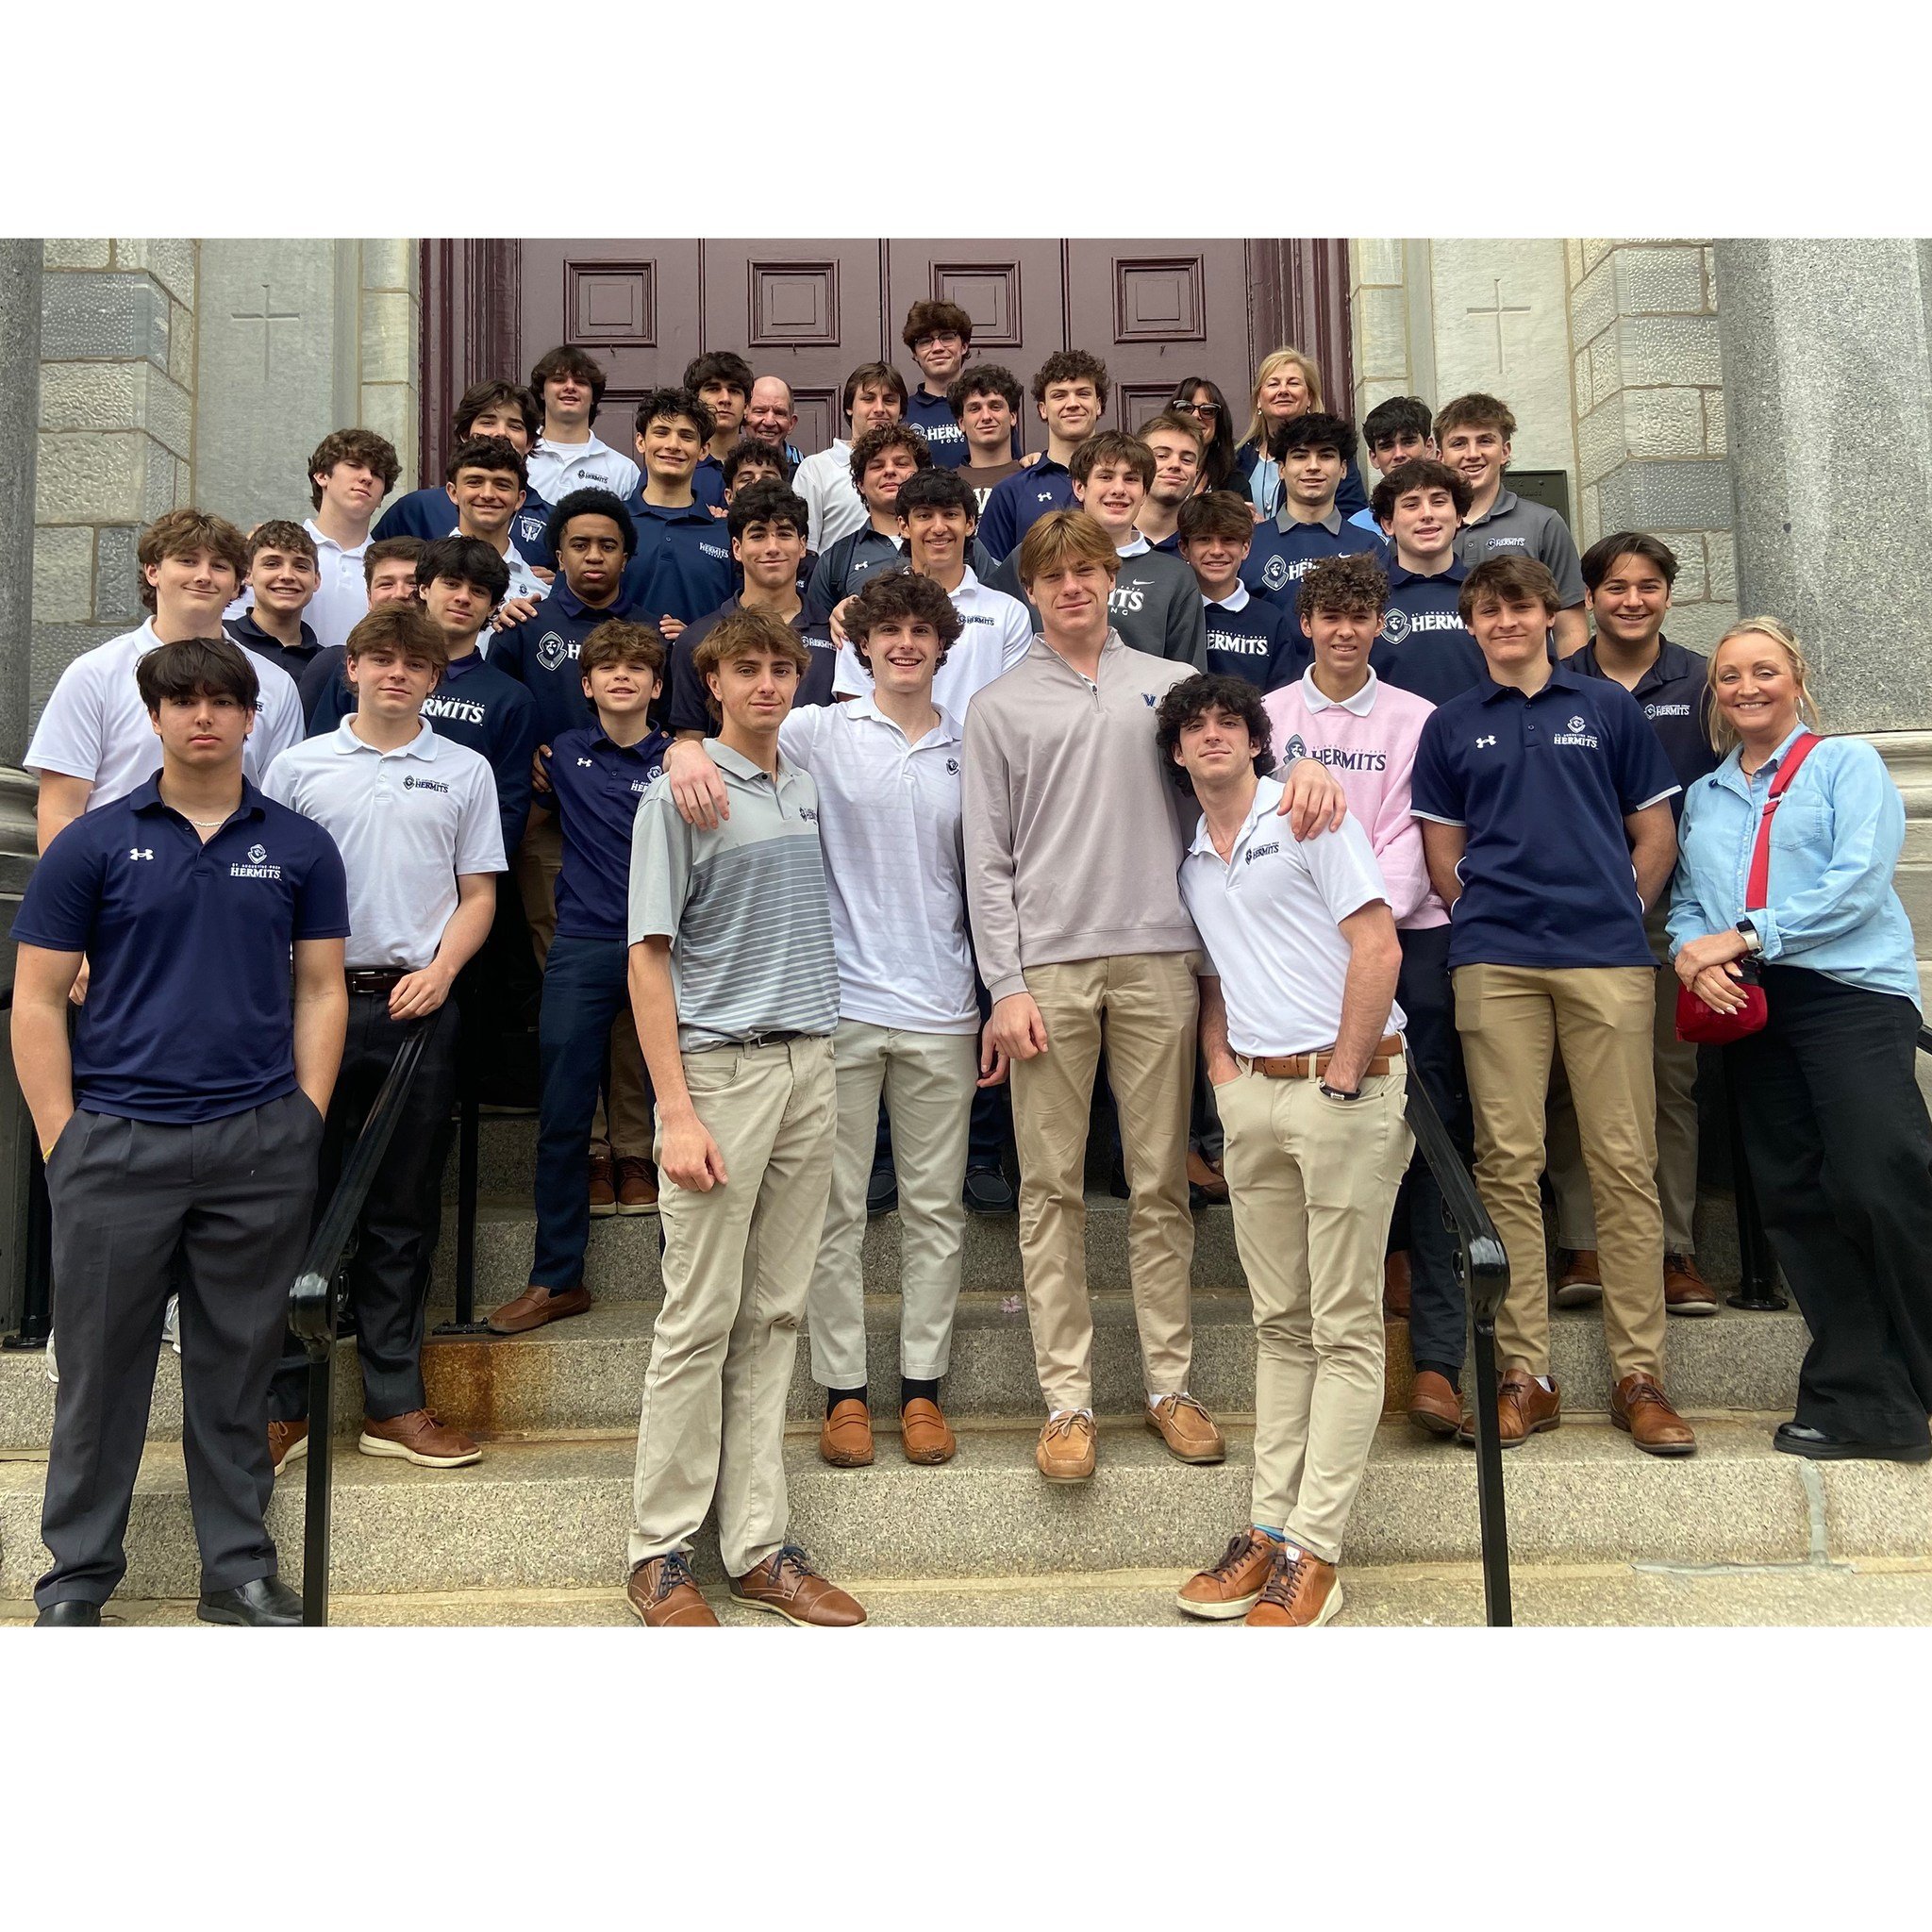 Exploring the heart of South Philly, our Italian Club made the rounds around the Italian Market, ending with a delightful meal at Positano Coast in Old City. The highlight? Quality time with Fr. Paul Galetto, OSA '74, former St. Augustine Prep Presid